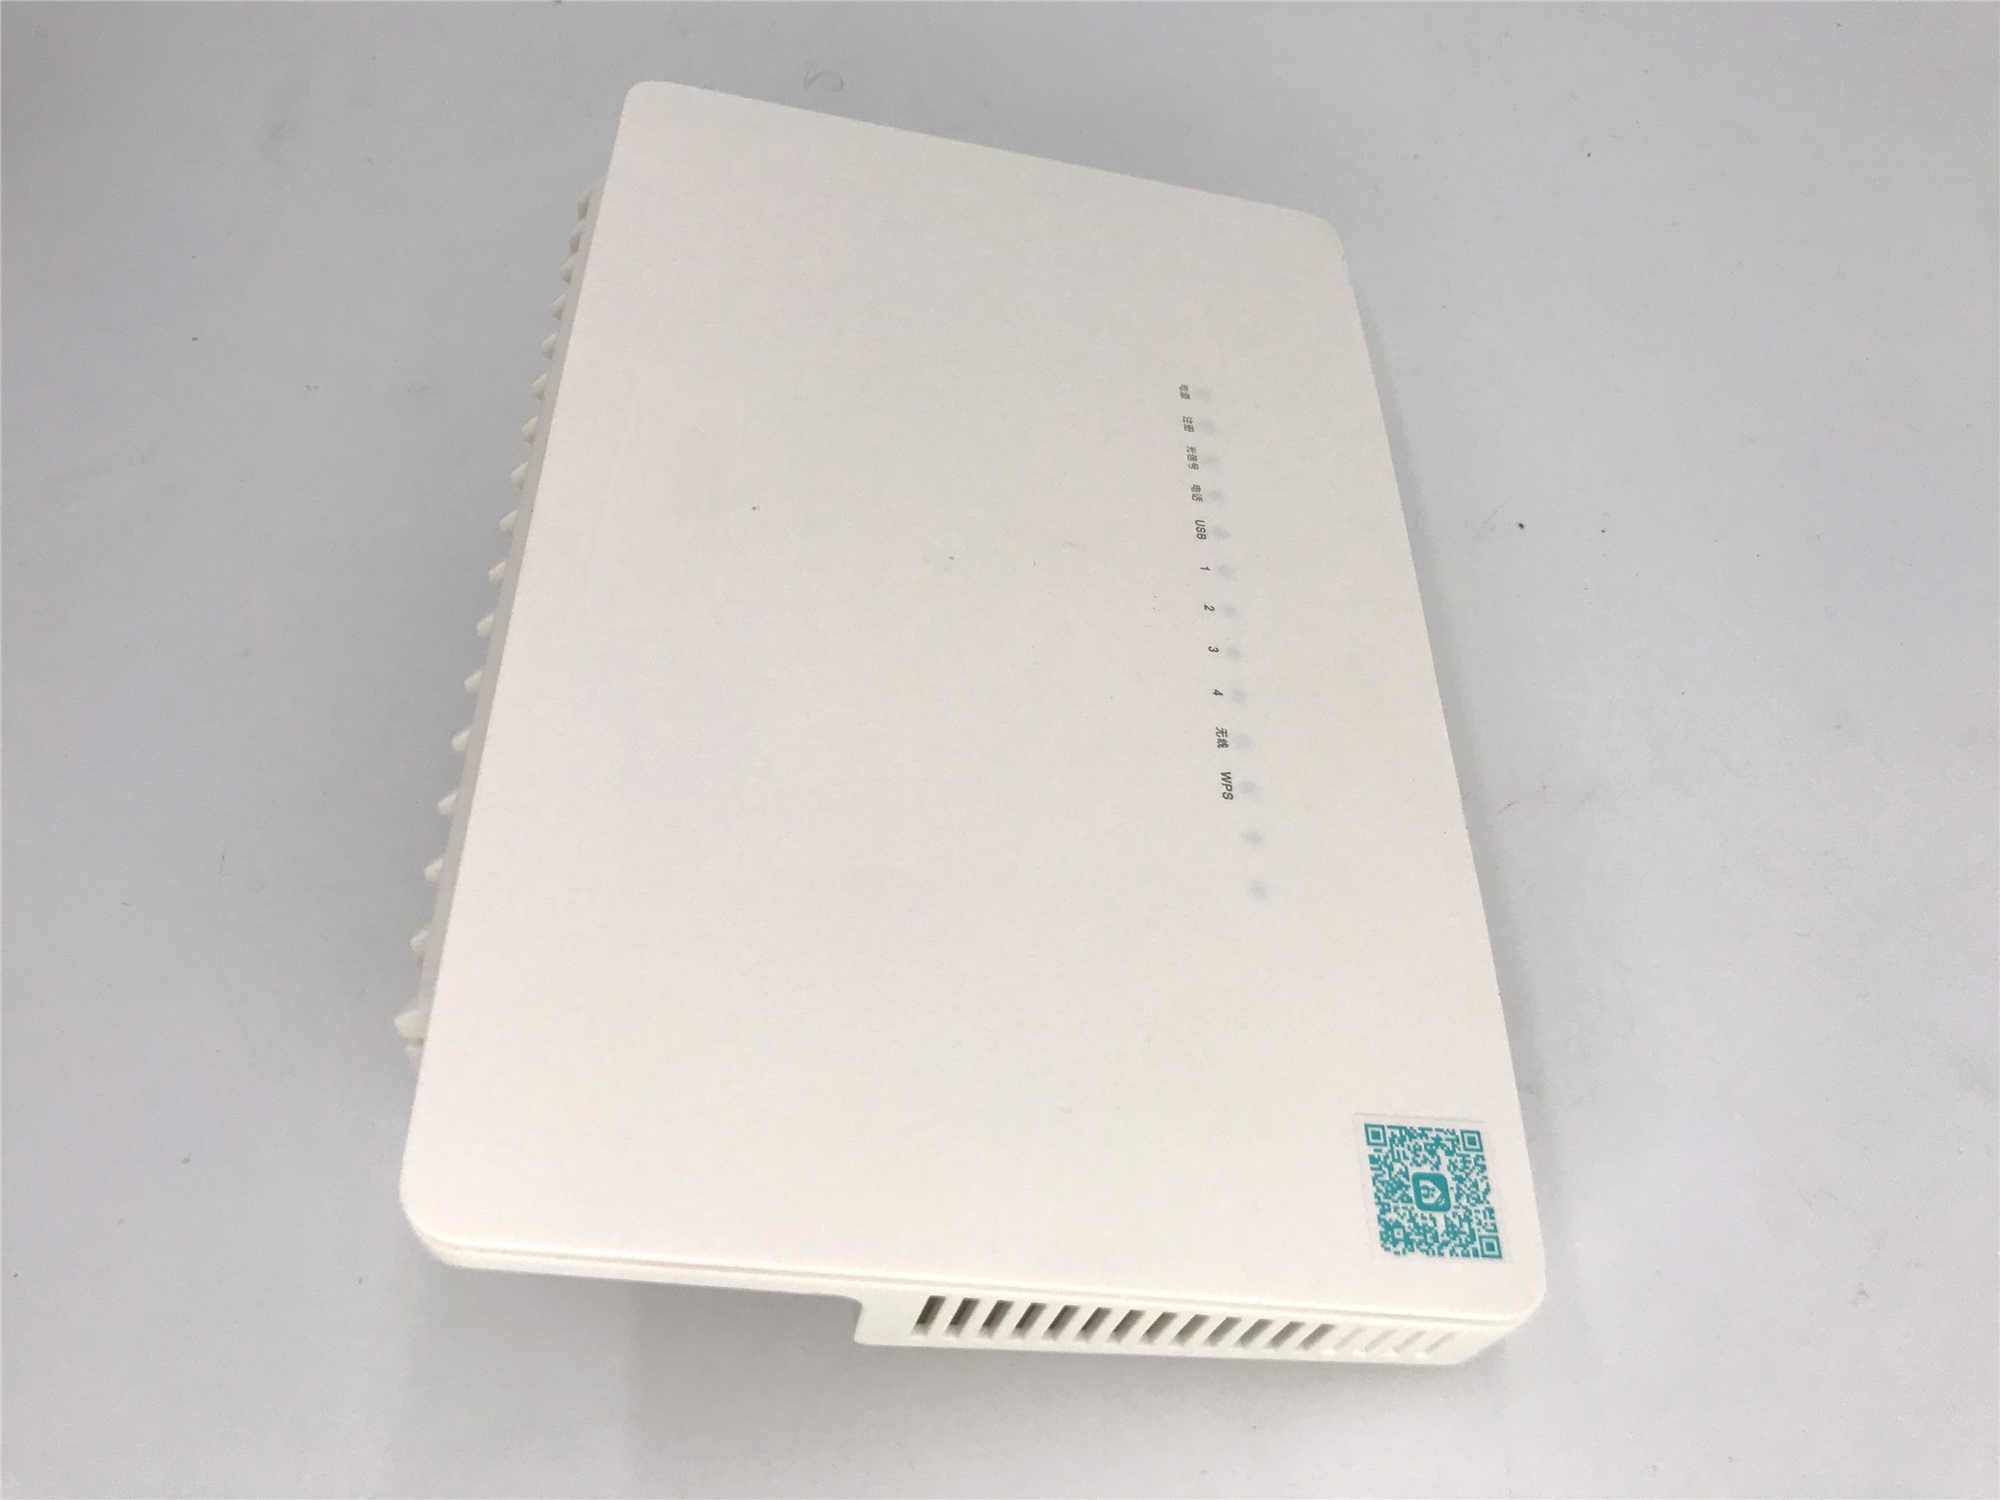 FTTH huawei HS8546V GPON ONU ONT with HGU Dual Band Router 4GE+Wifi2.4GHz /5GHz